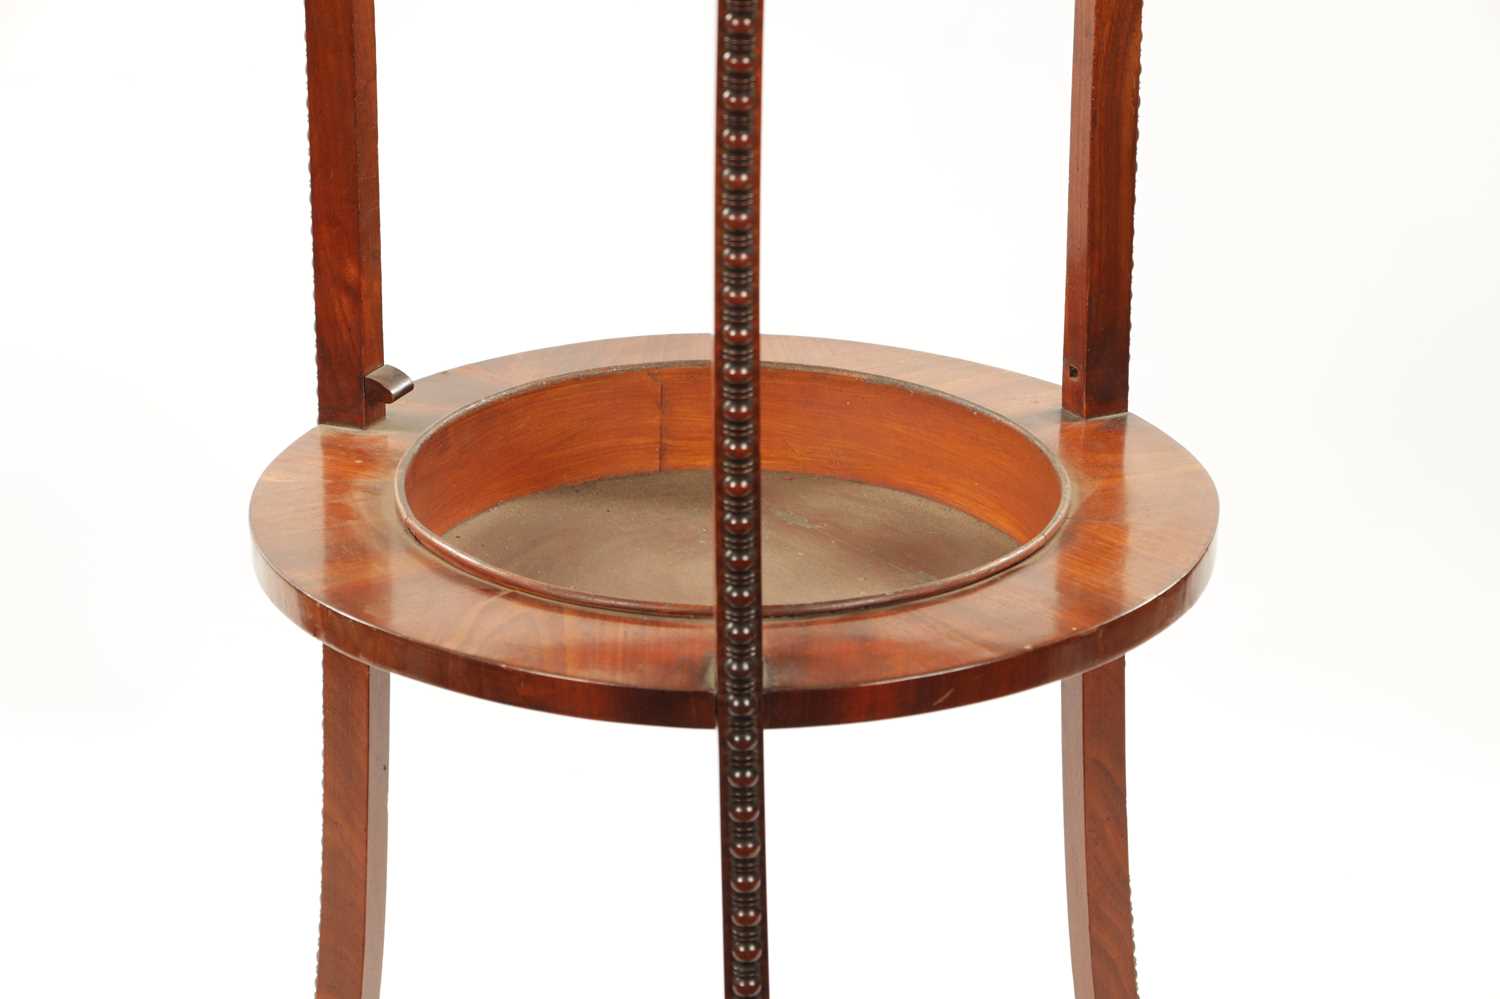 A REGENCY TWO TIER MAHOGANY JARDINIERE STAND WITH BEADED DECORATION - Image 3 of 6